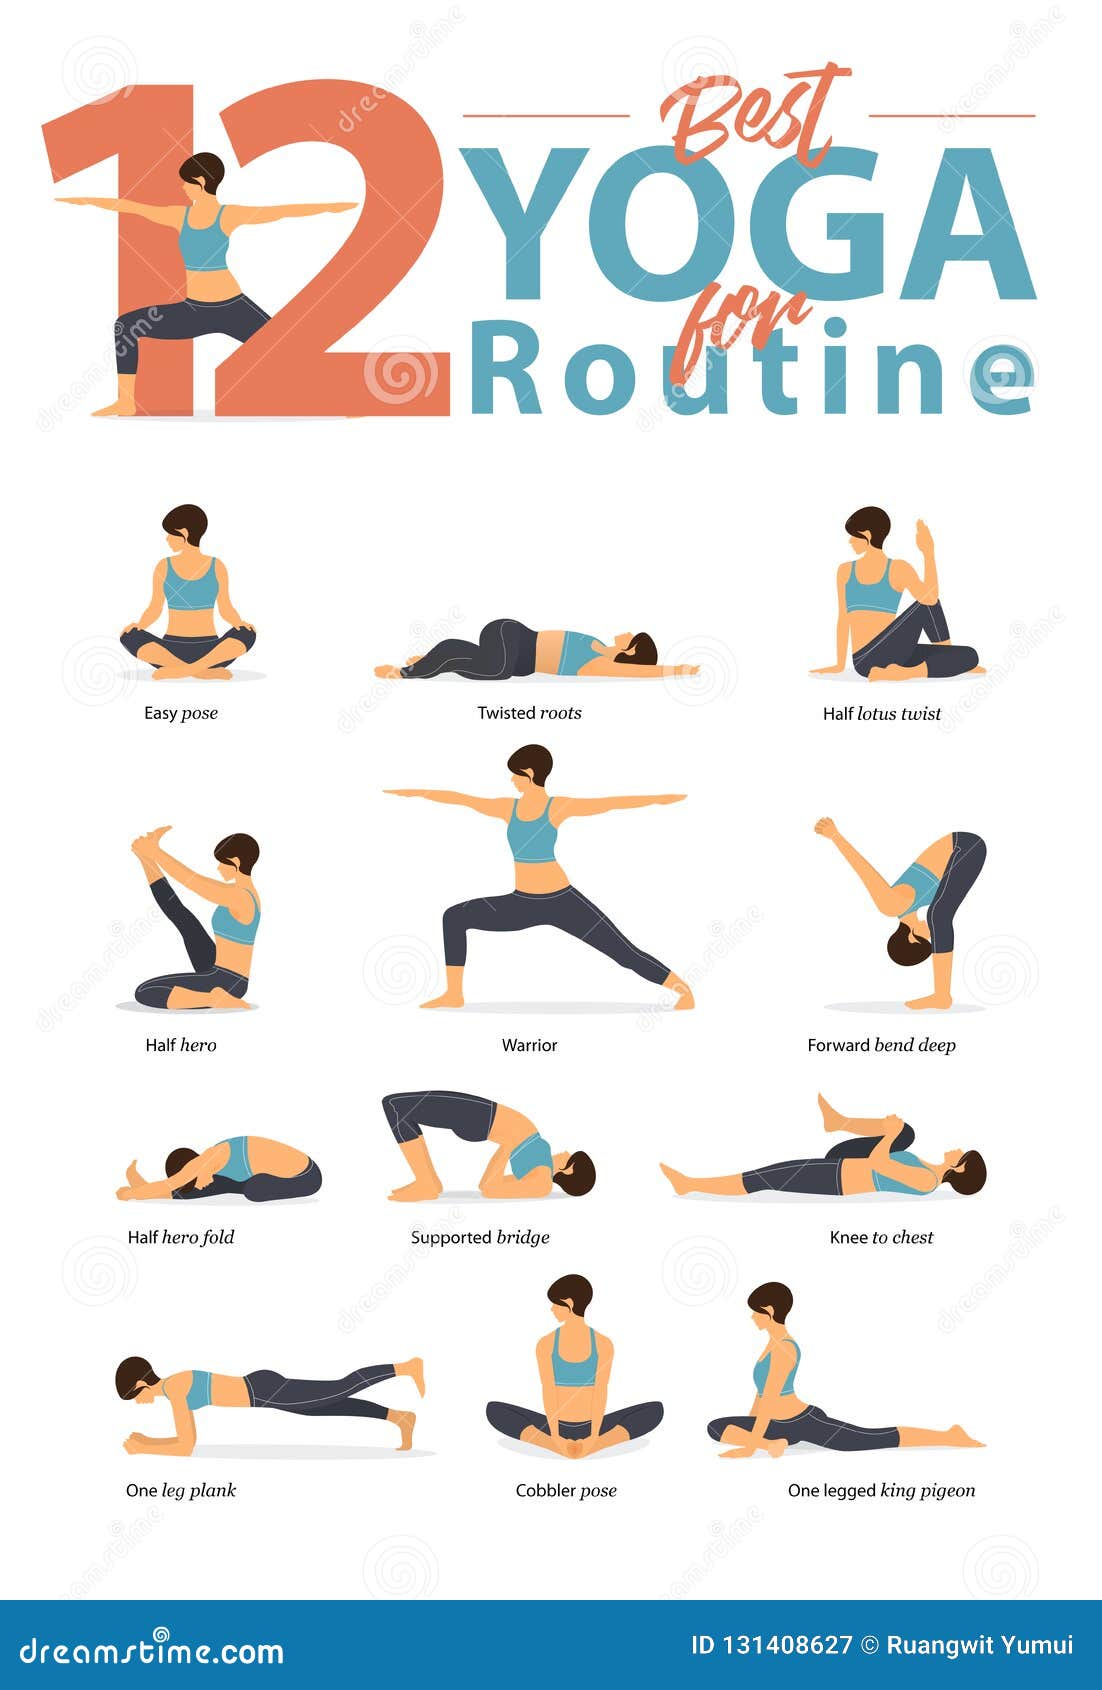 Set of Yoga Postures Female Figures for Infographic 12 Yoga Poses